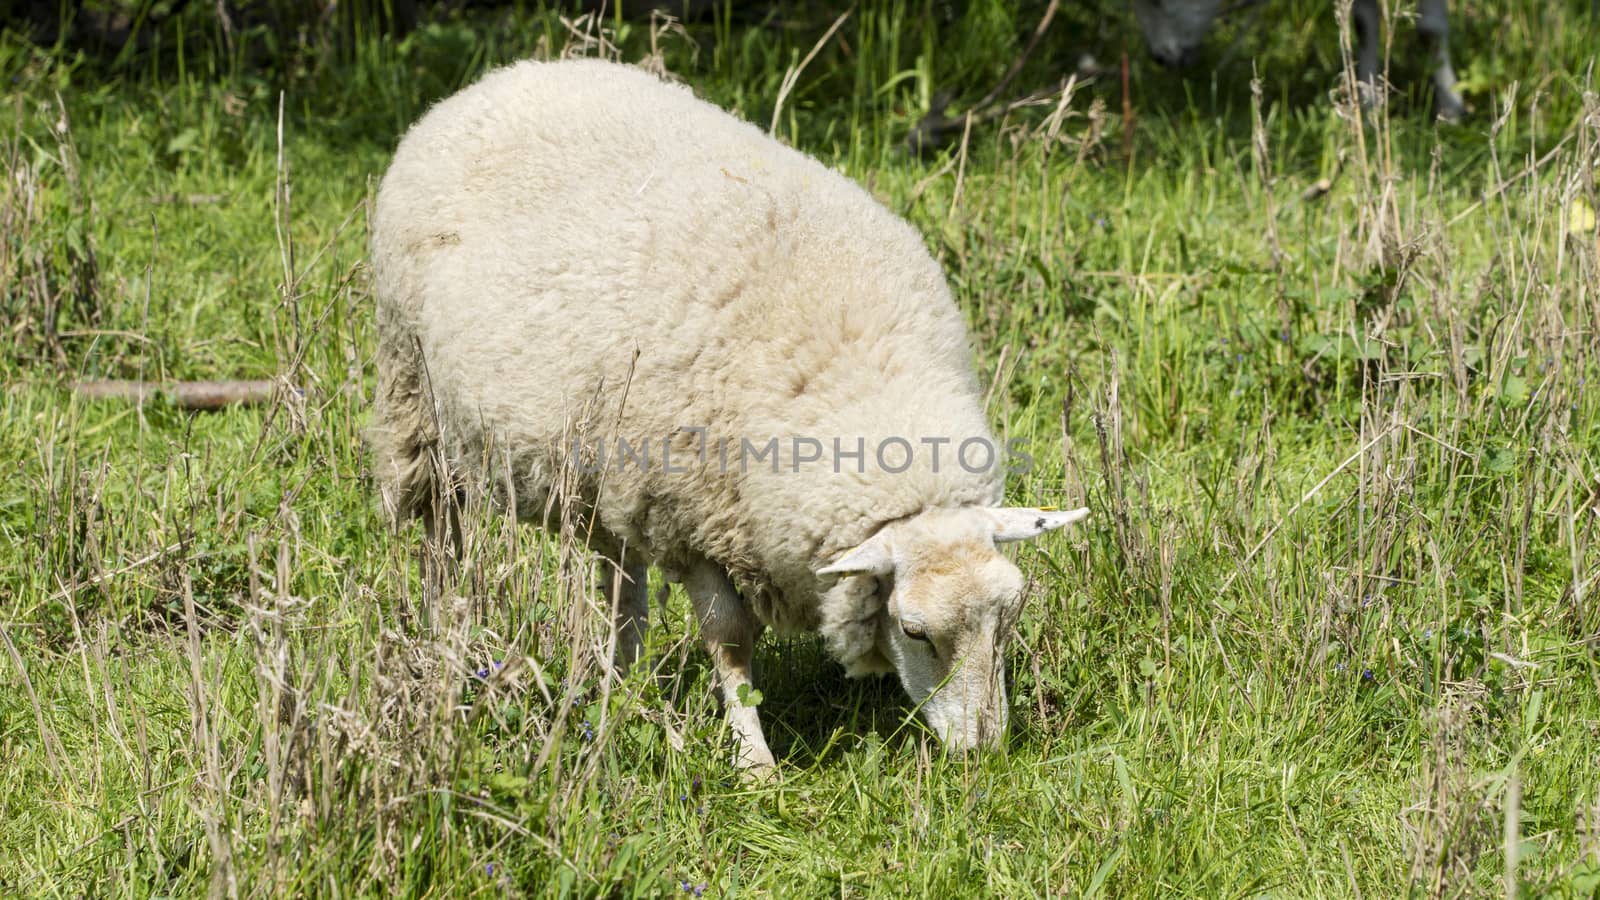 Sheep in a meadow - National Park on the Elbe